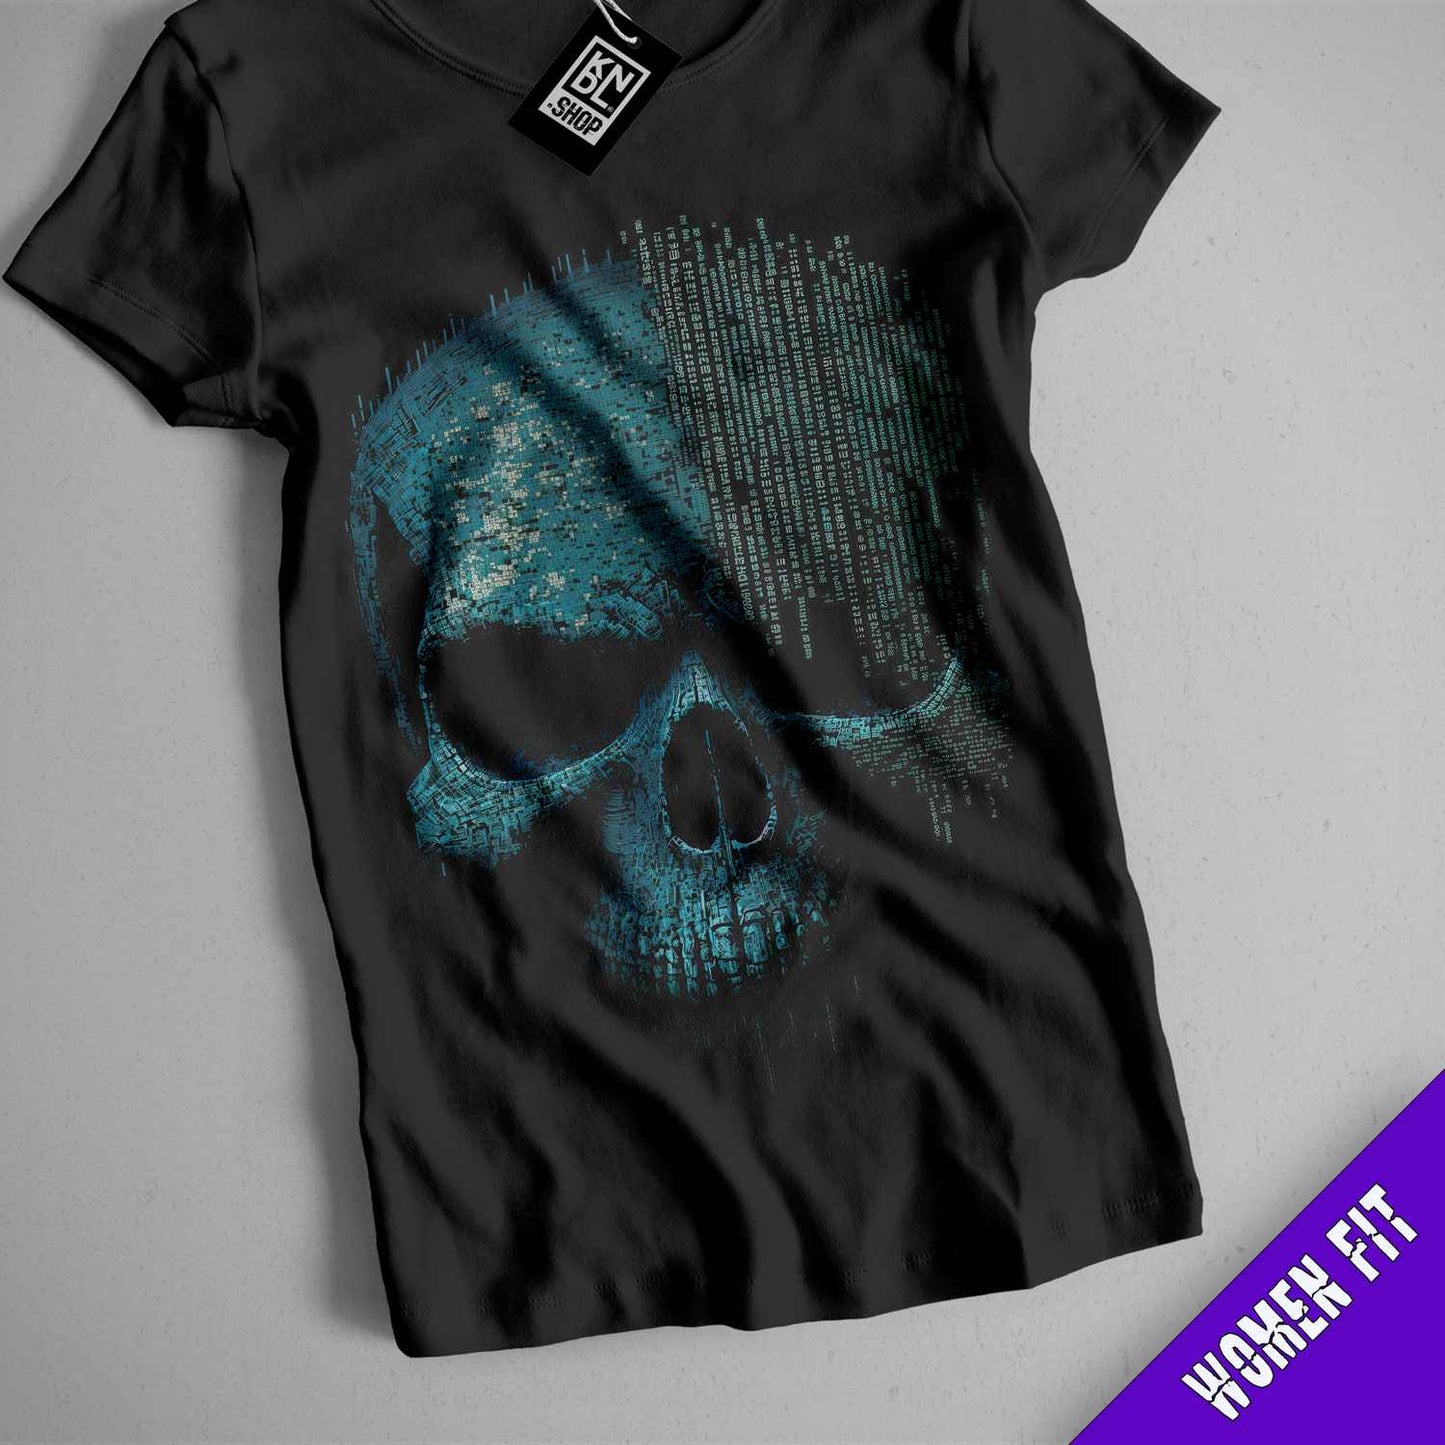 a black shirt with a blue skull on it